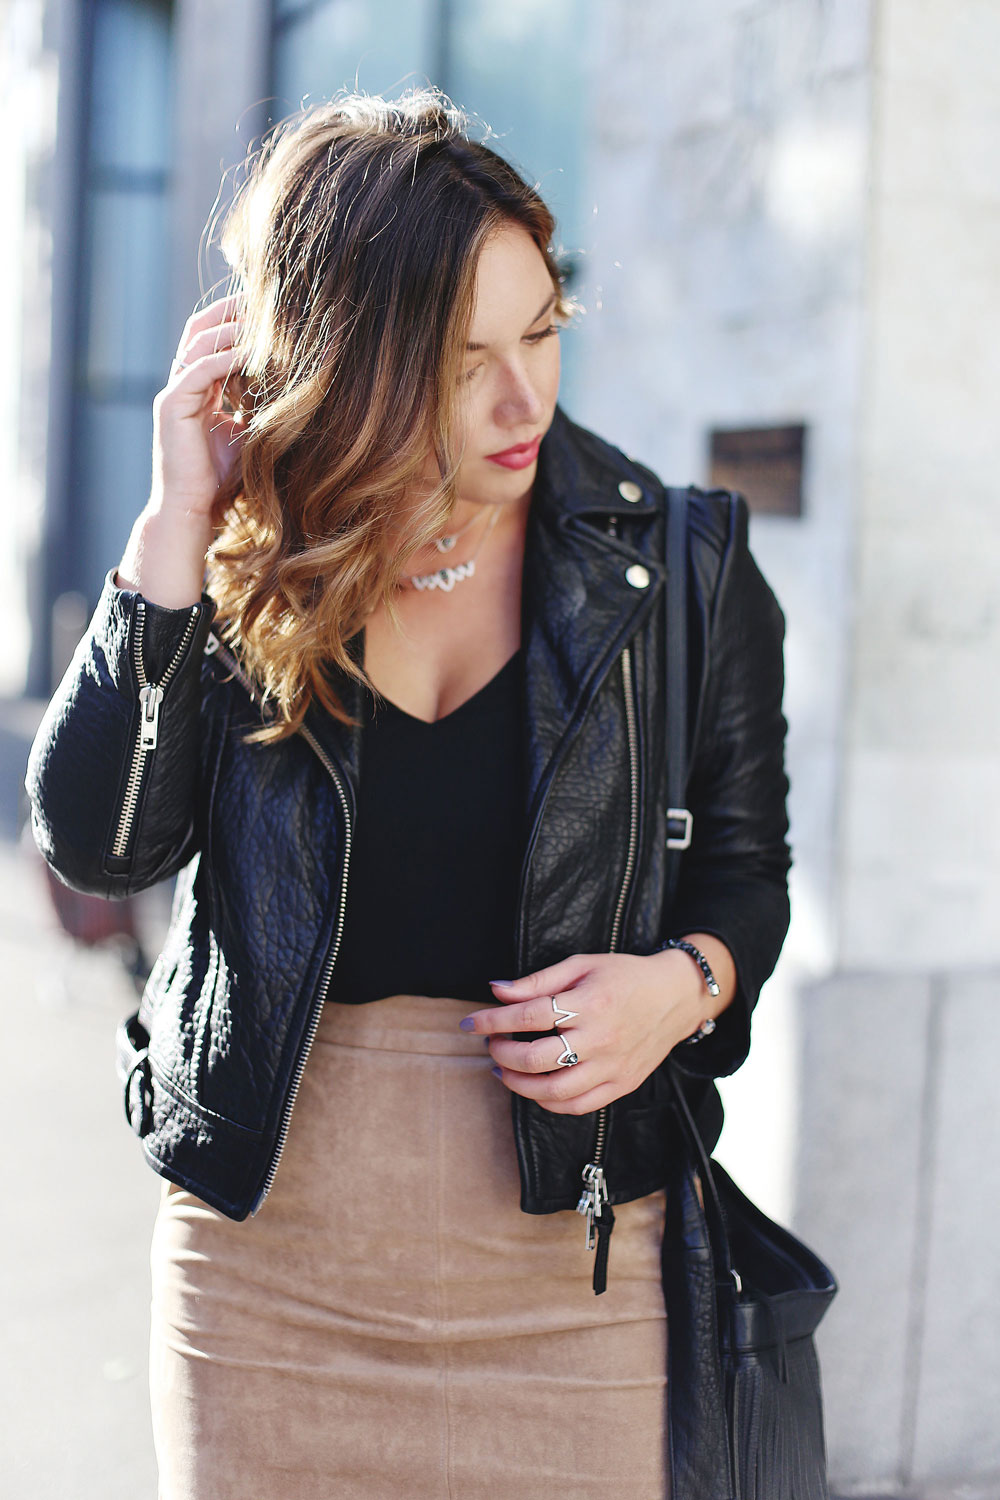 How to layer jewelry in Swarovski jewelry, Aritzia suede pencil skirt, Aritzia black camisole, Mackage leather jacket, Express black heels and Aritzia Wilfred fringe leather bag